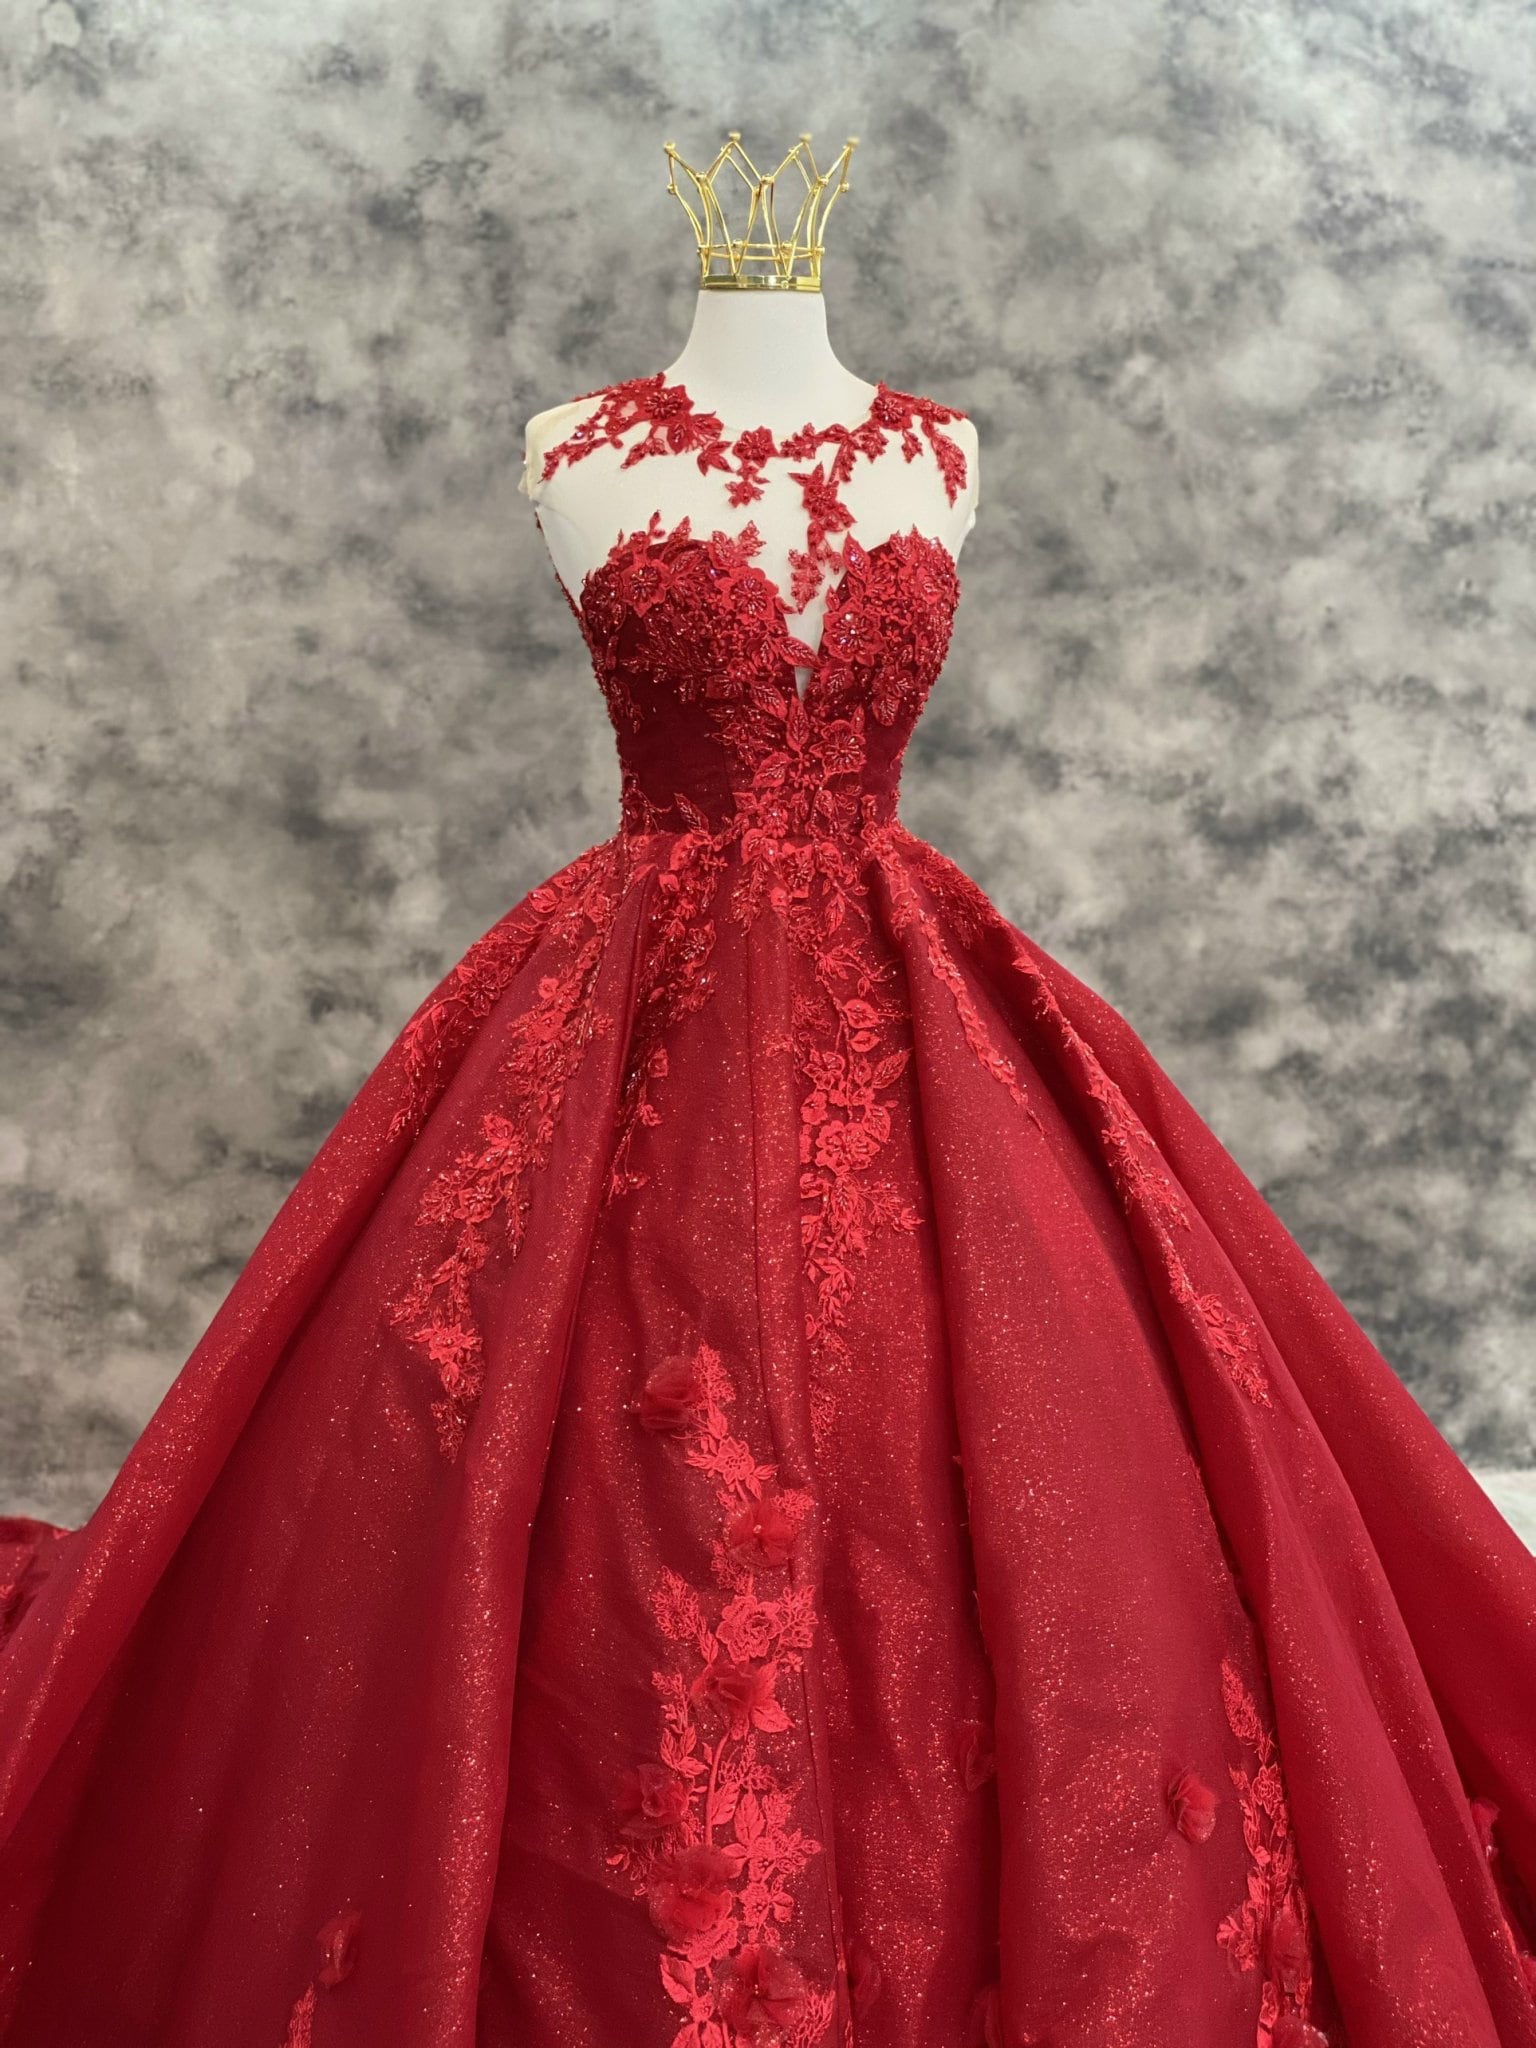 Red Ball Gown Tulle Lace High Neck Long Sleeve Wedding Dress With Beading